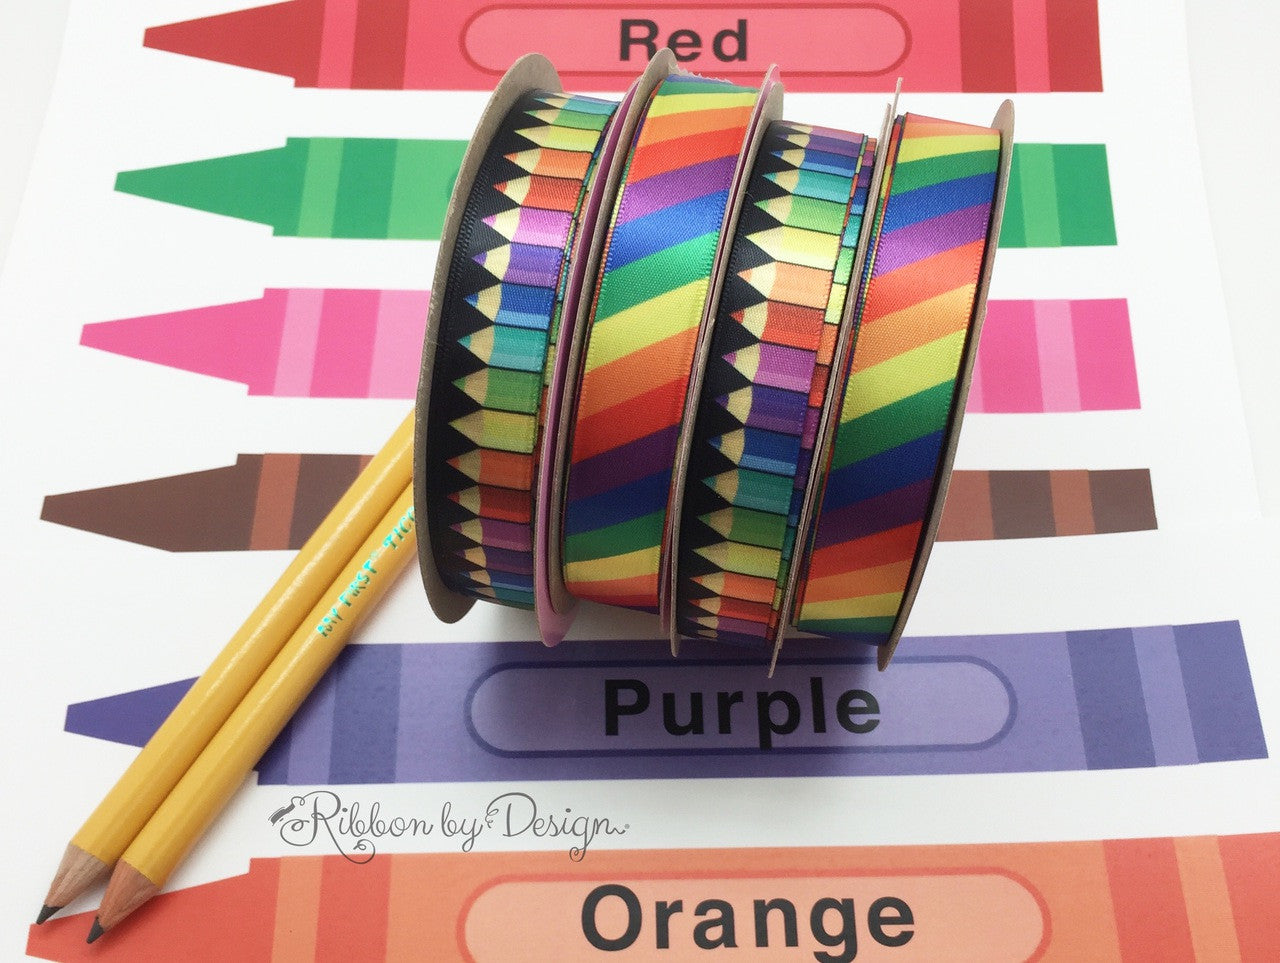 Colored pencils and rainbow ribbon make all the primary colors sing! Designed and printed in the USA